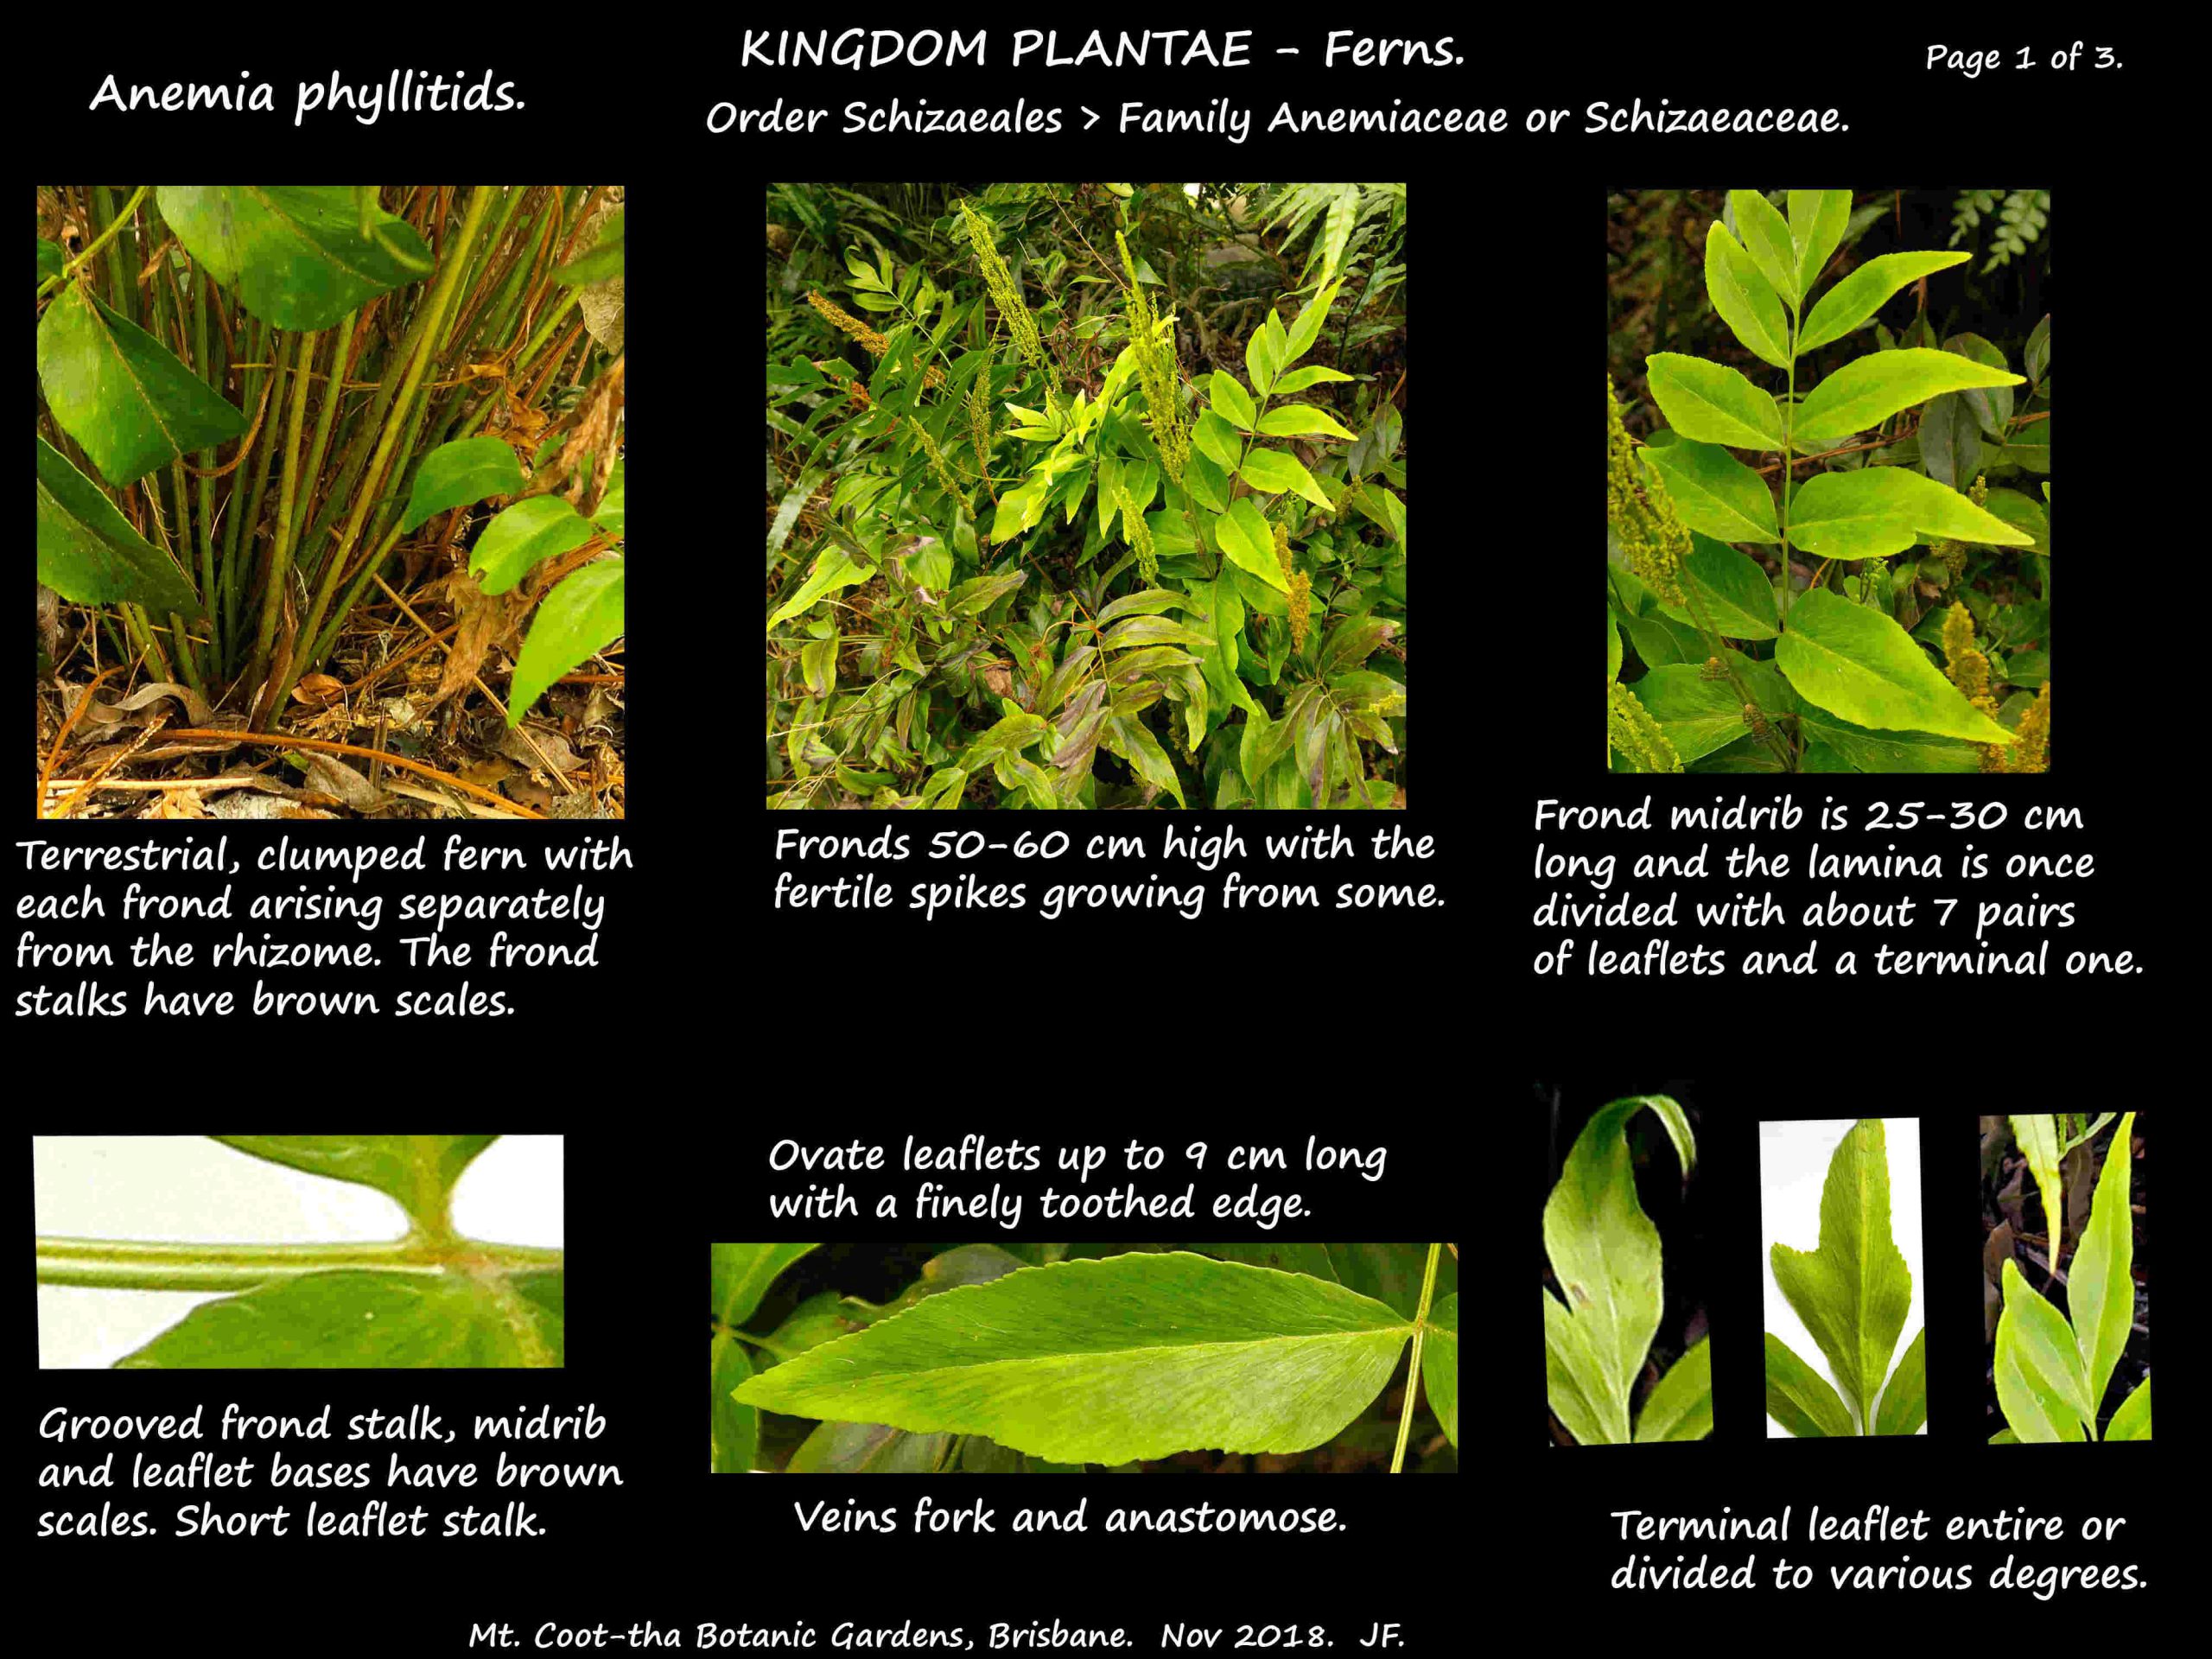 1 Anemia phyllitids plant & leaves